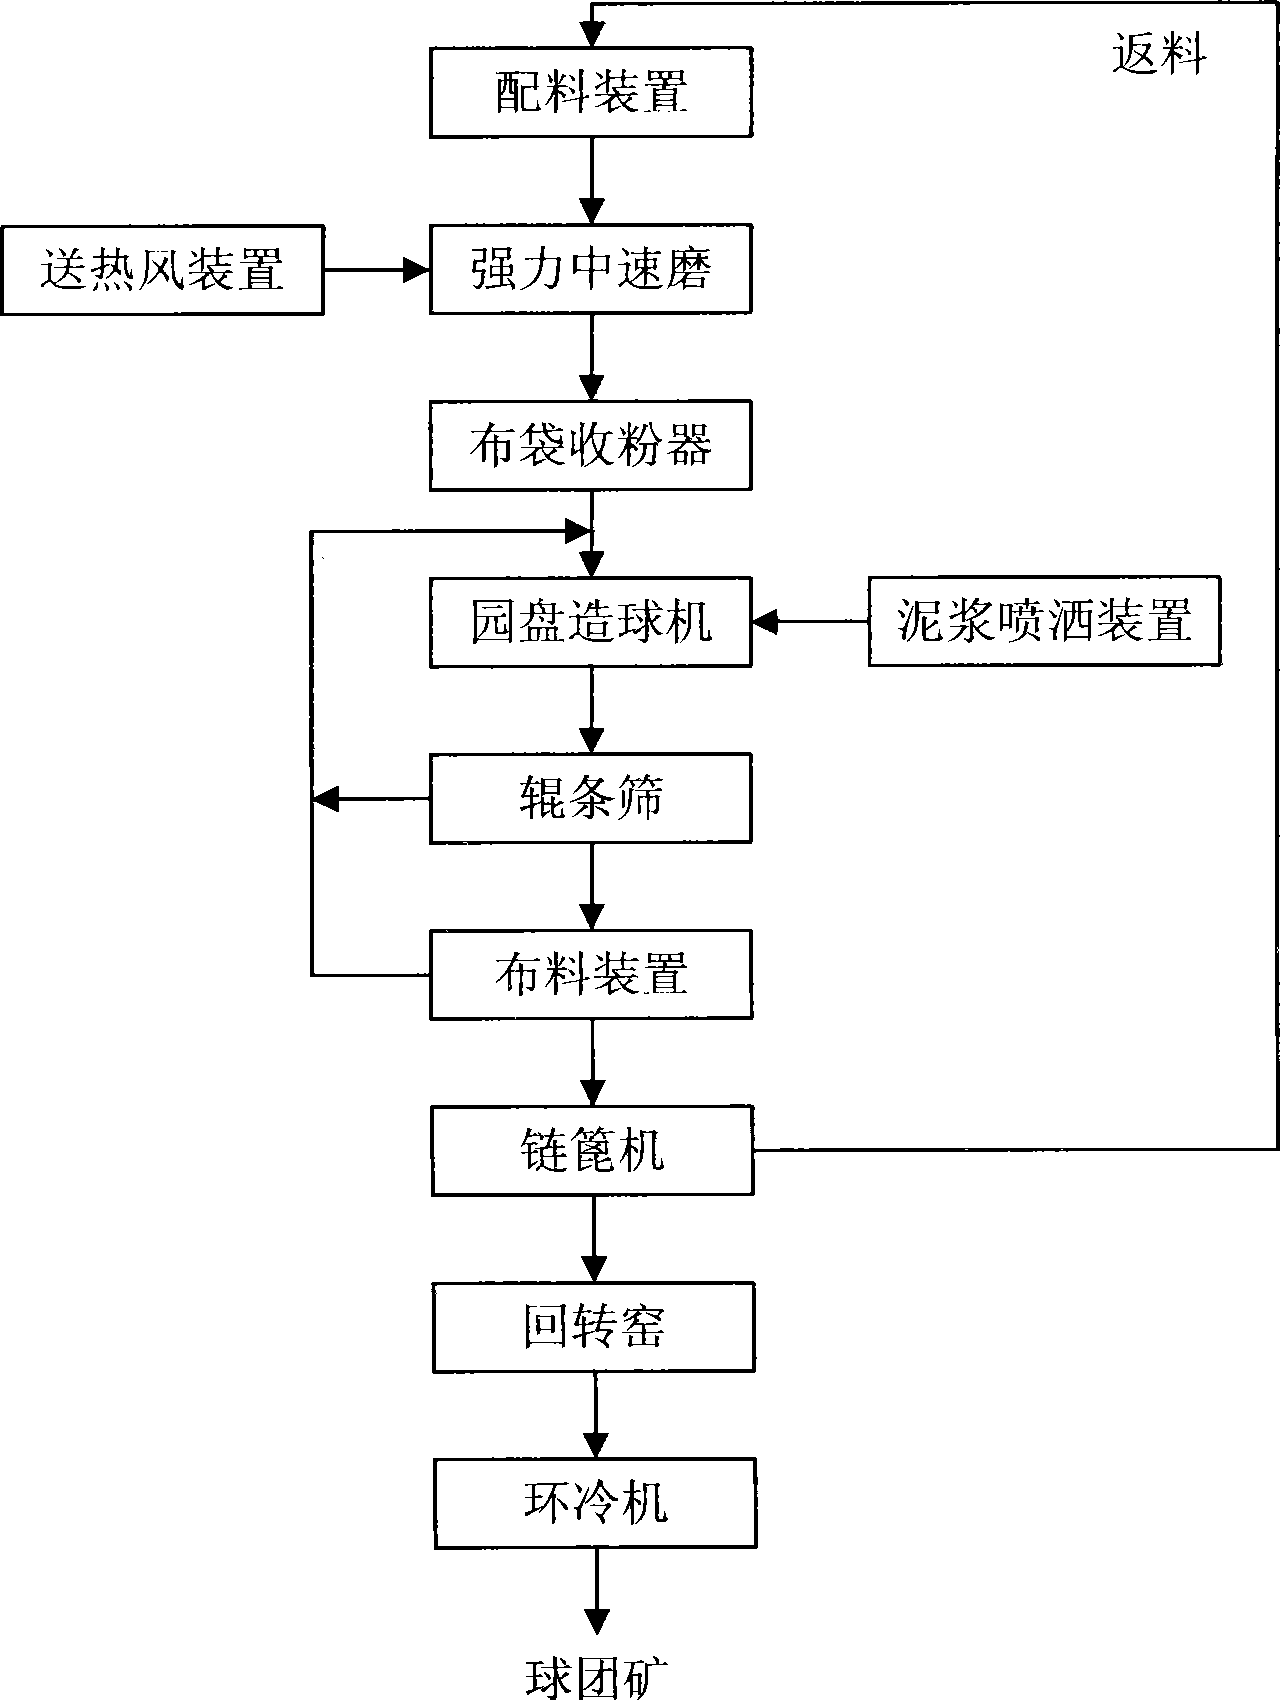 Equipment for producing oxidized pellet and method for producing oxidized pellet by using the same